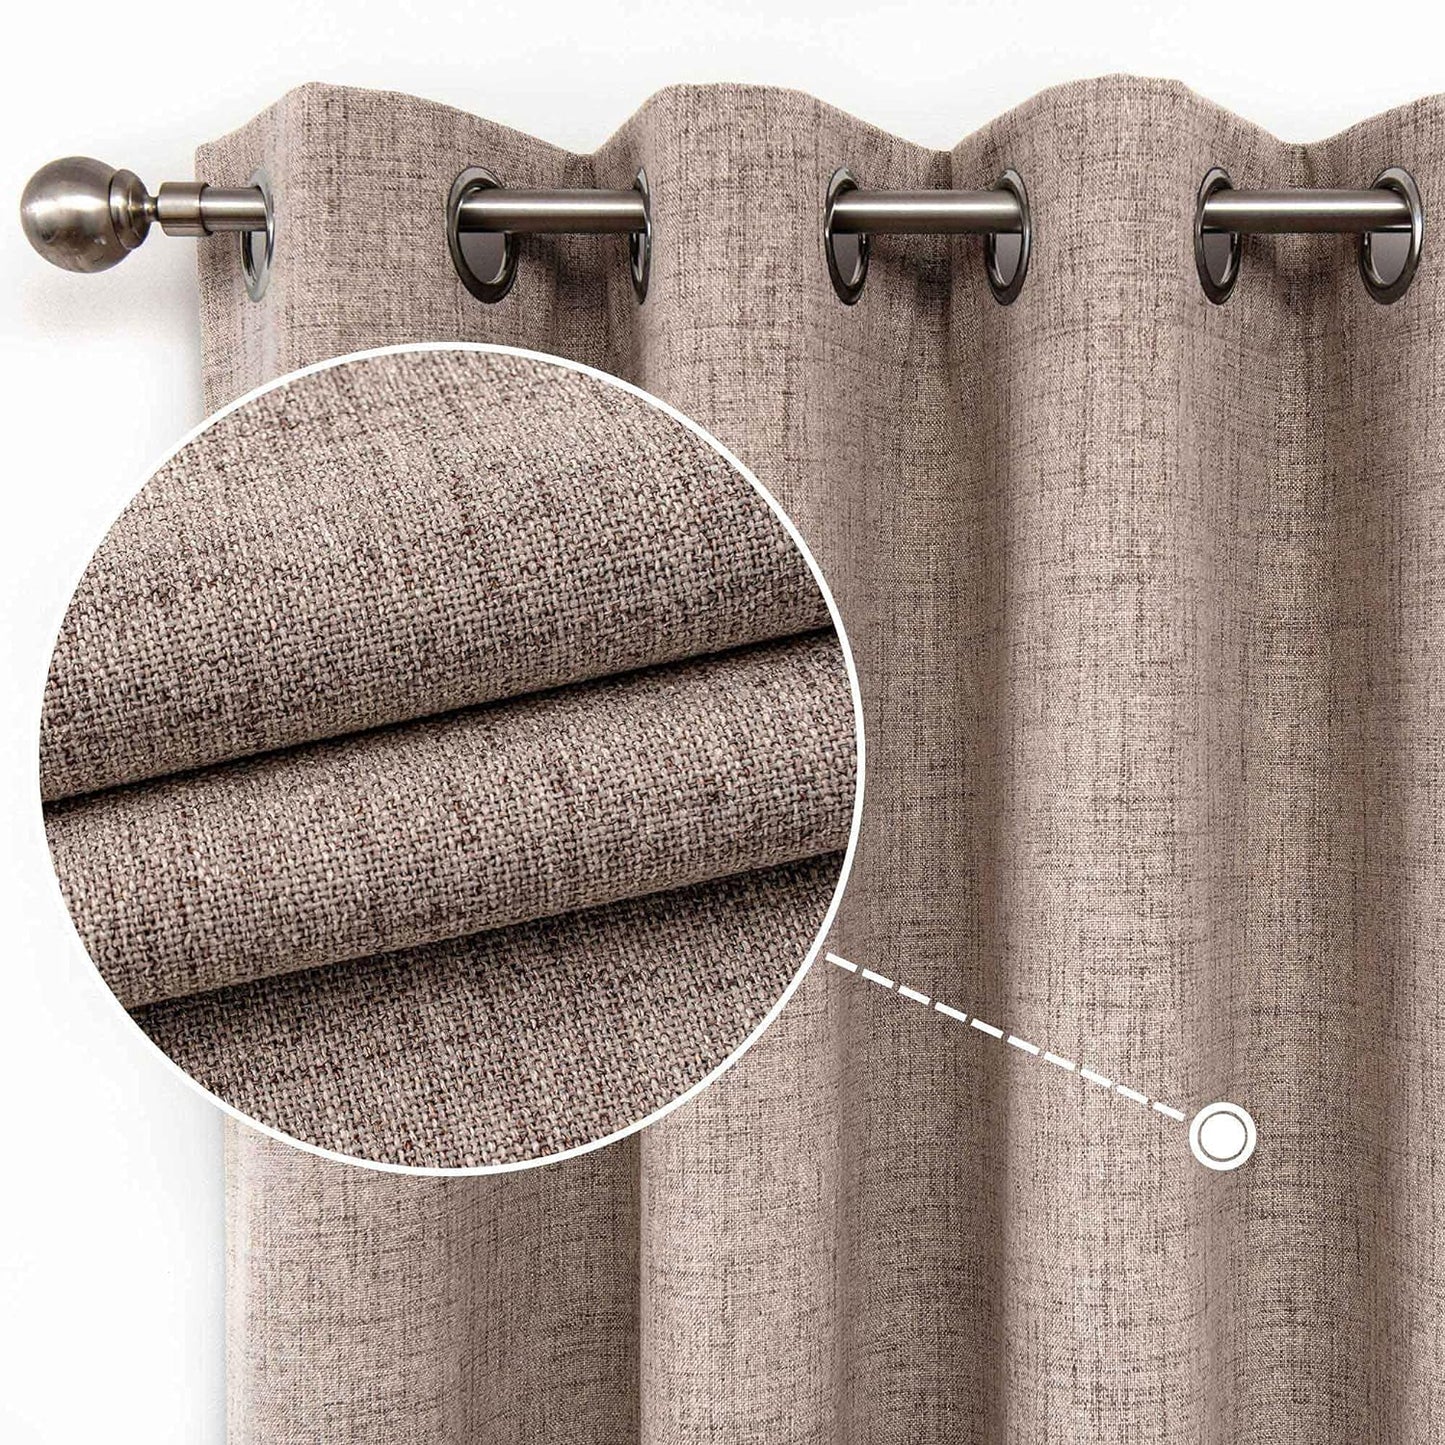 CUCRAF 100% Blackout Window Curtains for Bedroom Noise Reducing,Thermal Insulated Room Darkening Grommet Drapes for Living Room,2 Panels Sets(52 X 95 Inches, Light Khaki)  CUCRAF   